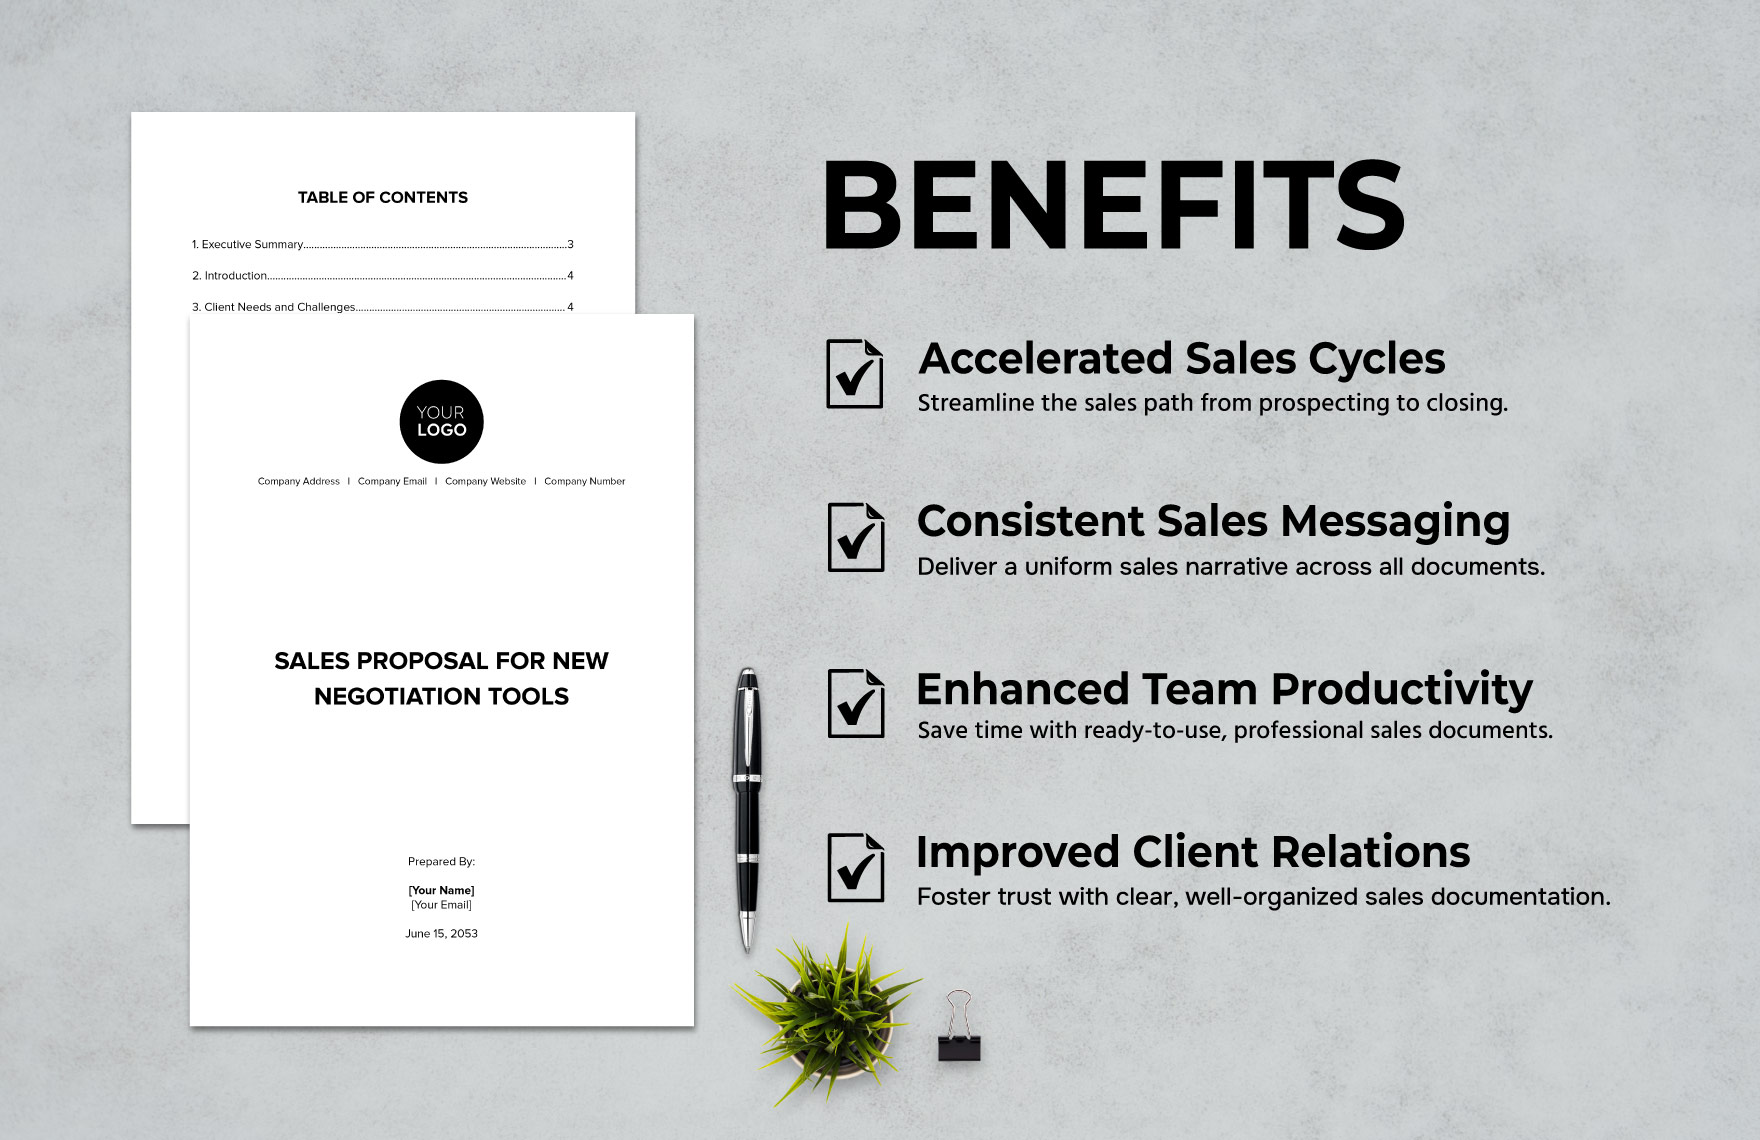 Sales Proposal for New Negotiation Tools Template